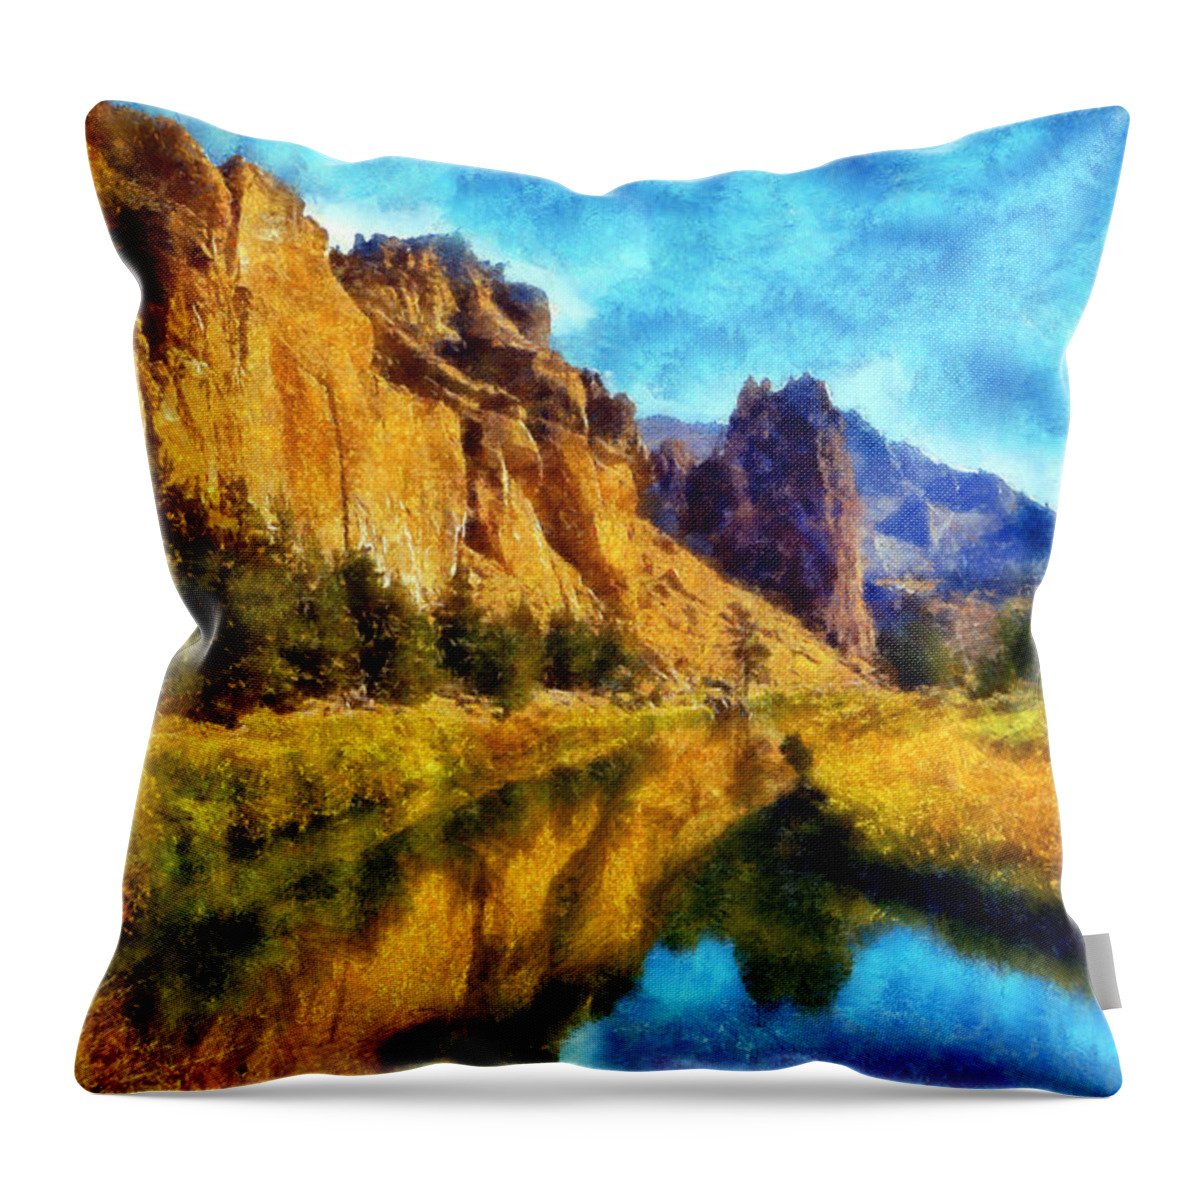 Smith Rock Throw Pillow featuring the digital art The Crooked River by Kaylee Mason